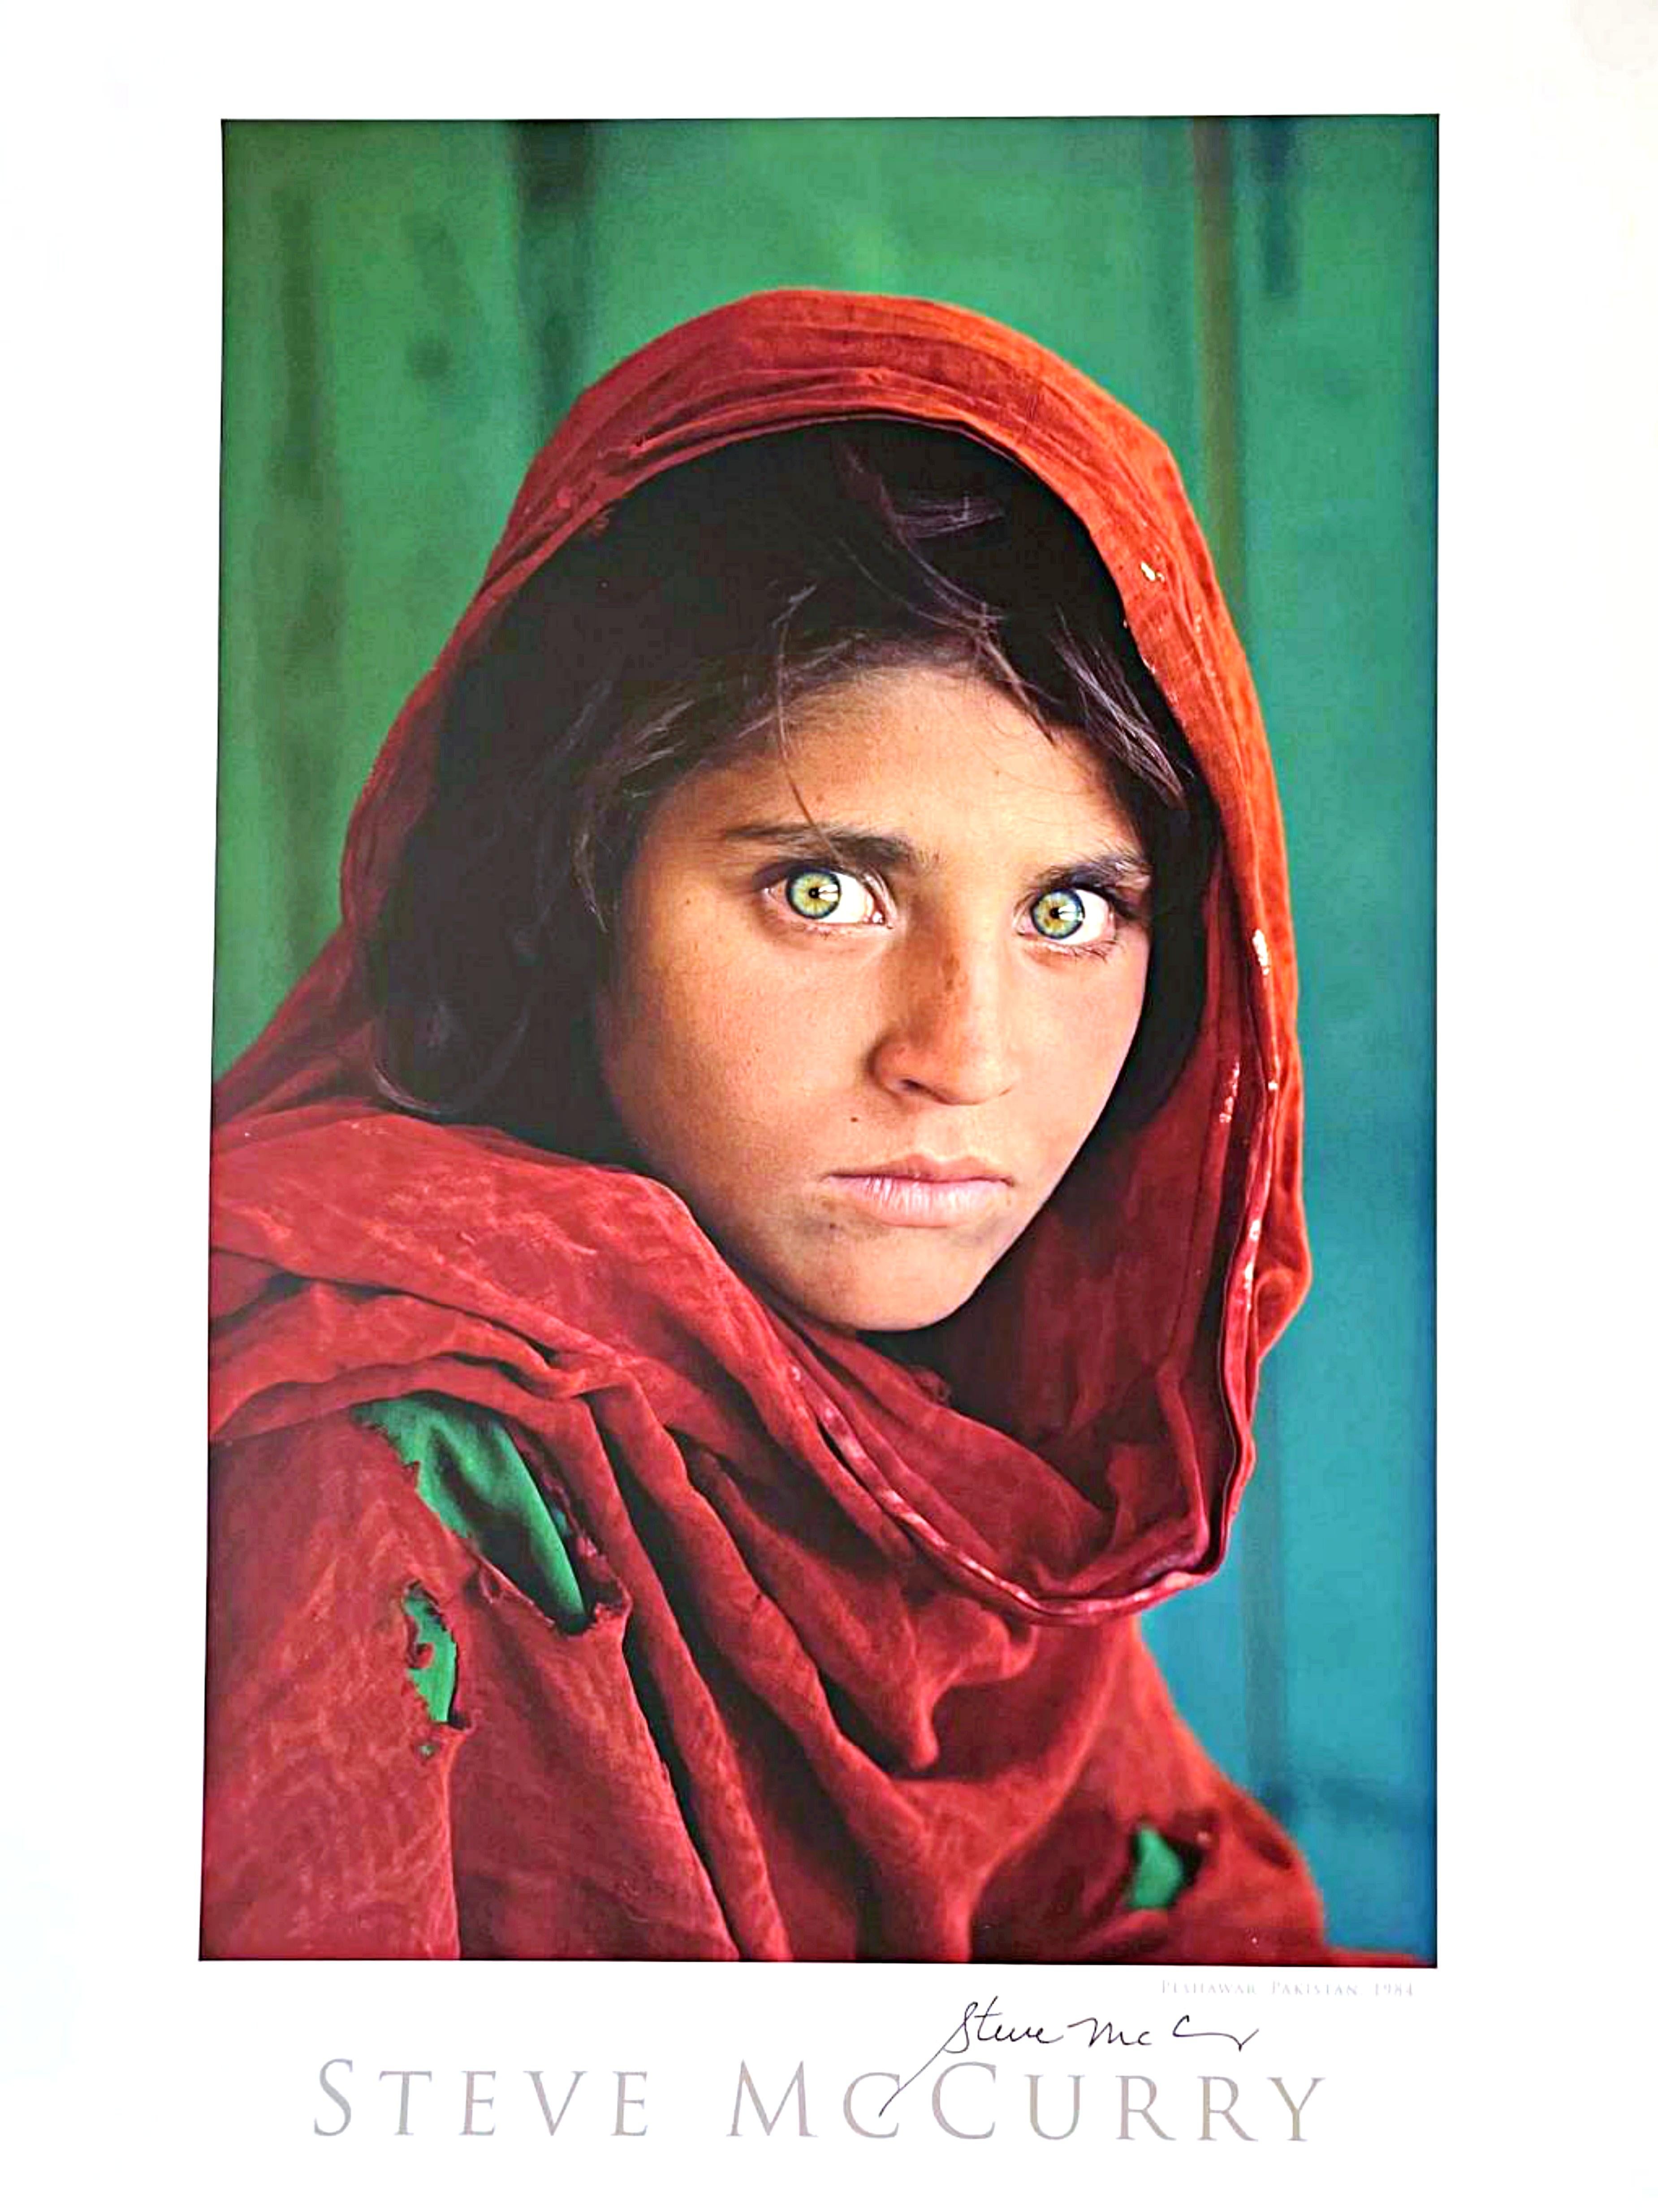 Steve McCurry
Sharbat Gula, Afghan Girl, Pakistan (Hand Signed), 1984
Offset Lithograph poster 
Hand signed by the photographer in black felt pen on the front
24 × 20 inches
Unframed
This offset lithograph poster features famed photographer Steve